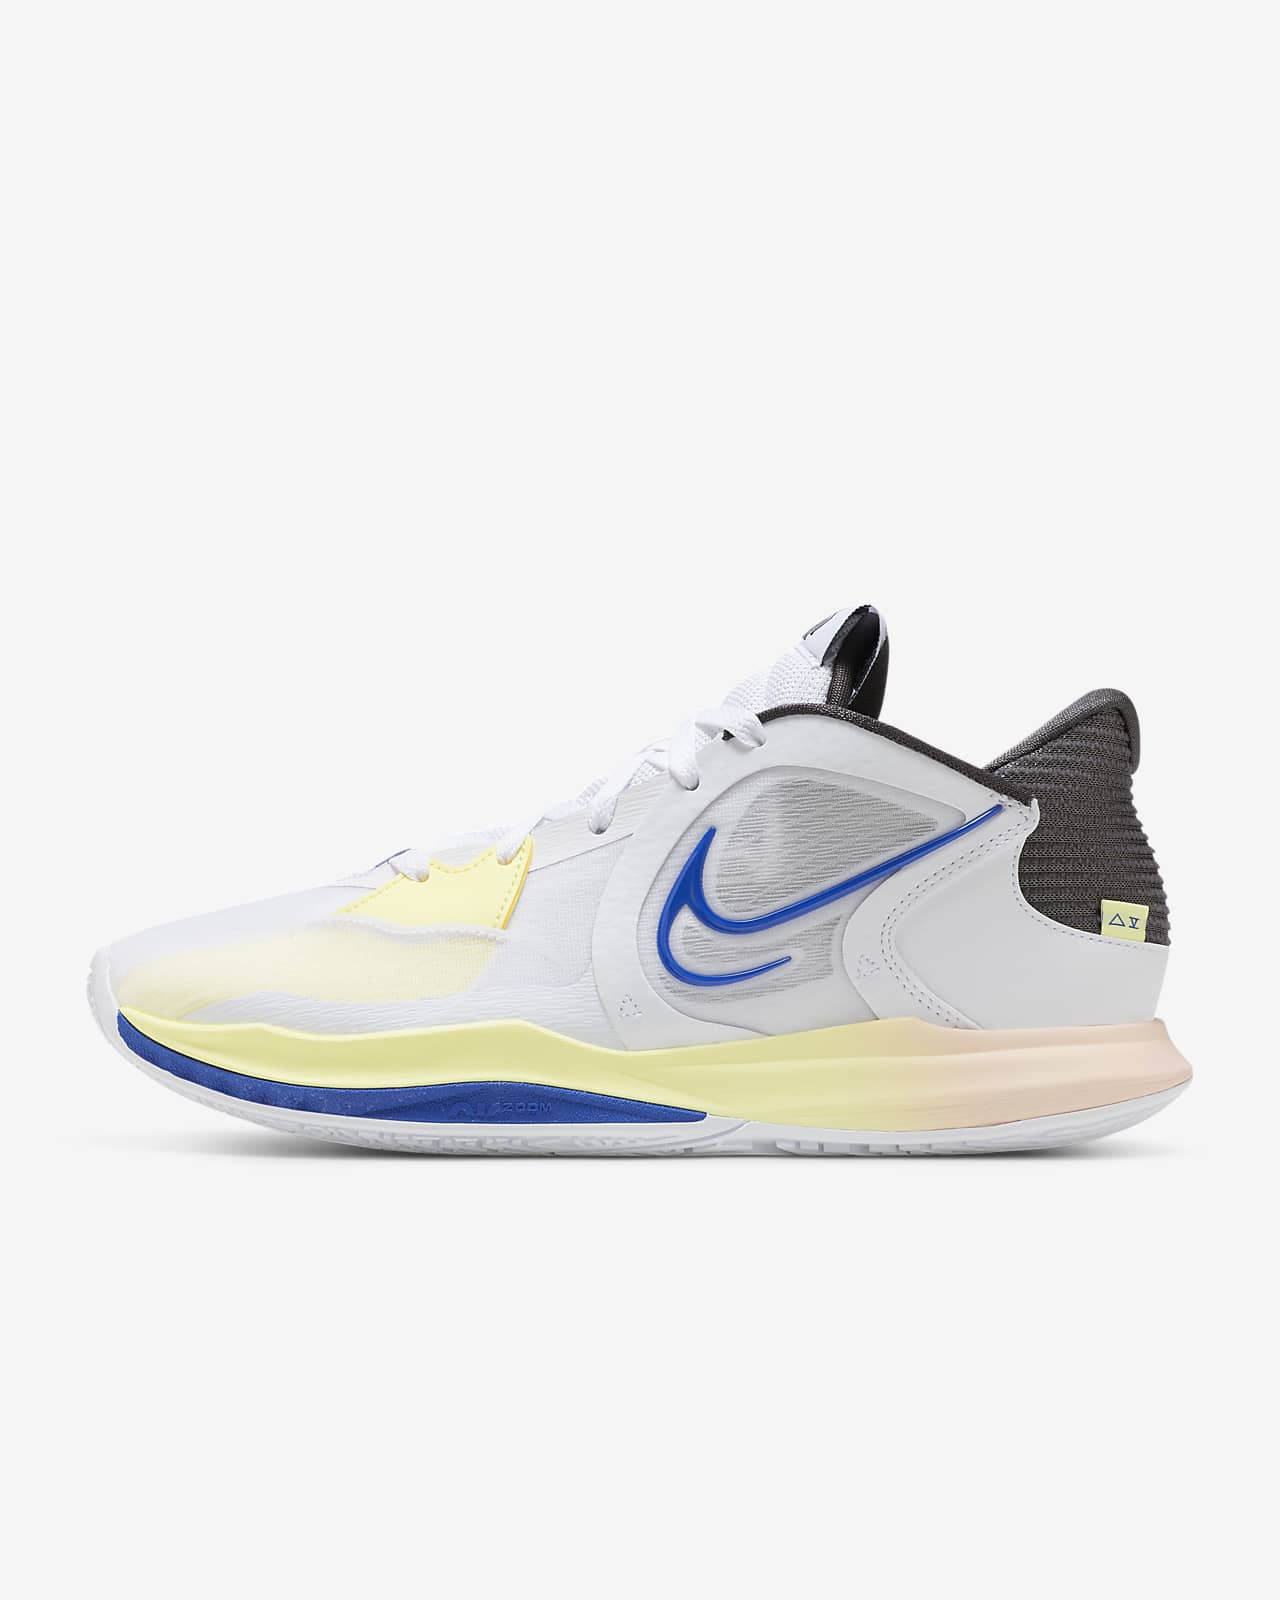 Kyrie Low 5 EP Basketball Shoes